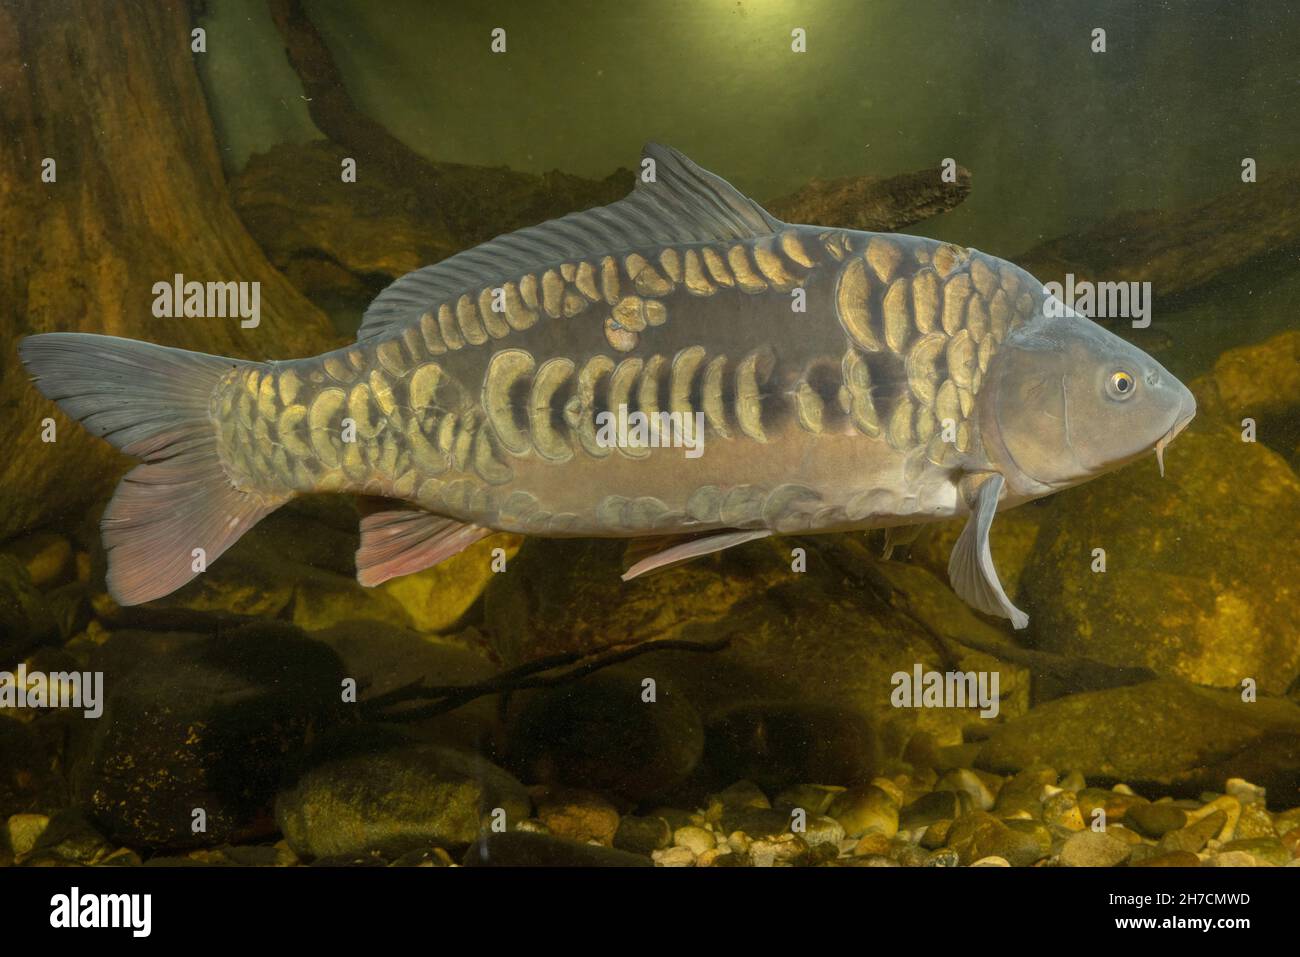 carp, common carp, European carp (Cyprinus carpio), fully scaled carp (one row of scales in the middle of the body) with unusually large scales, Stock Photo